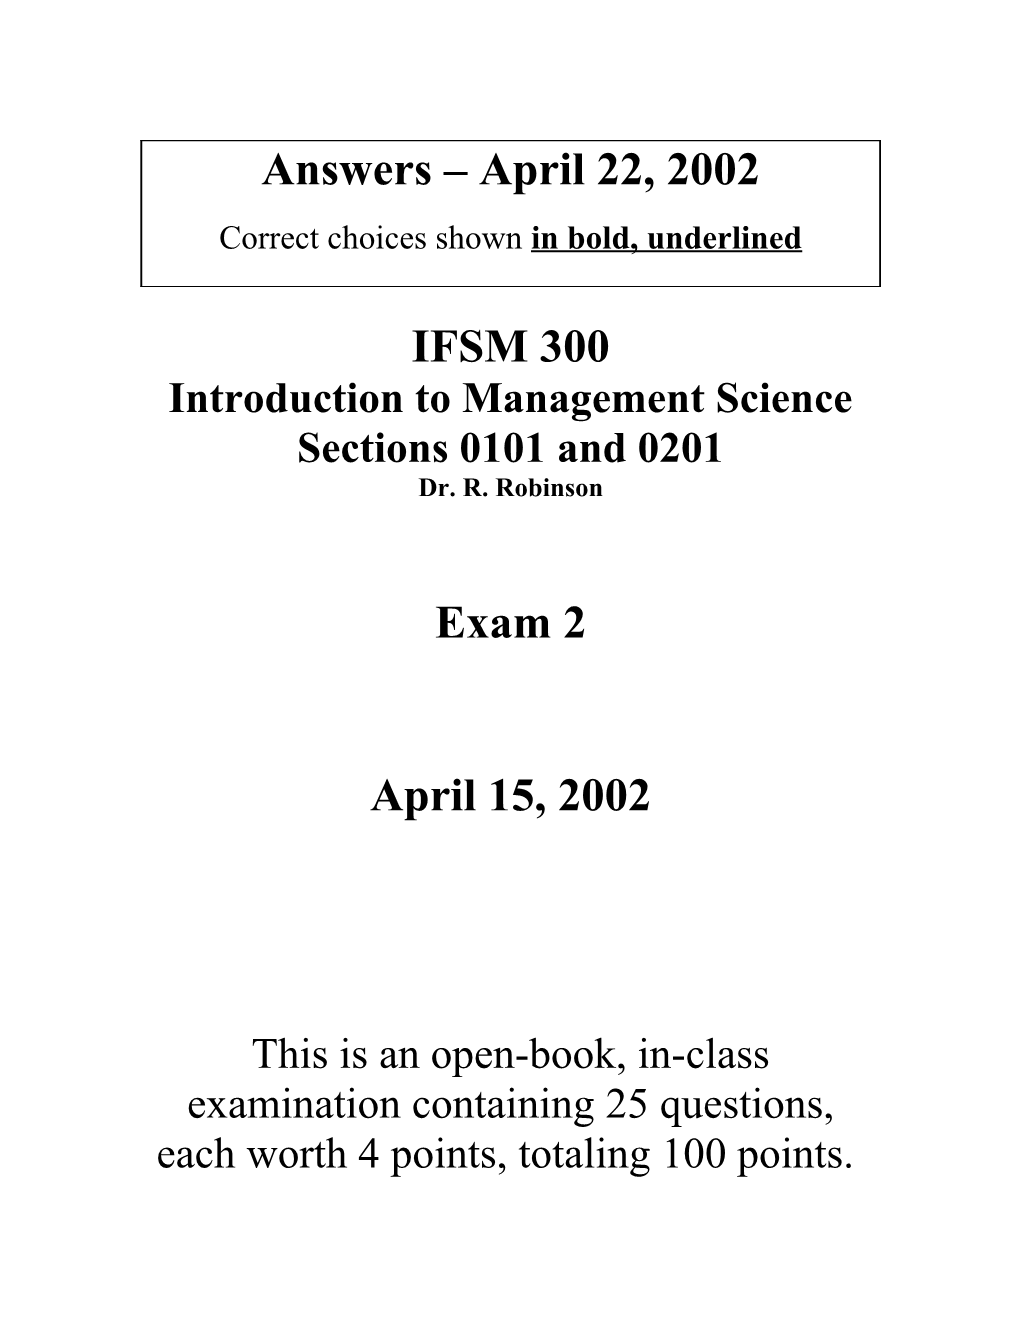 IFSM 300 Introduction to Management Science